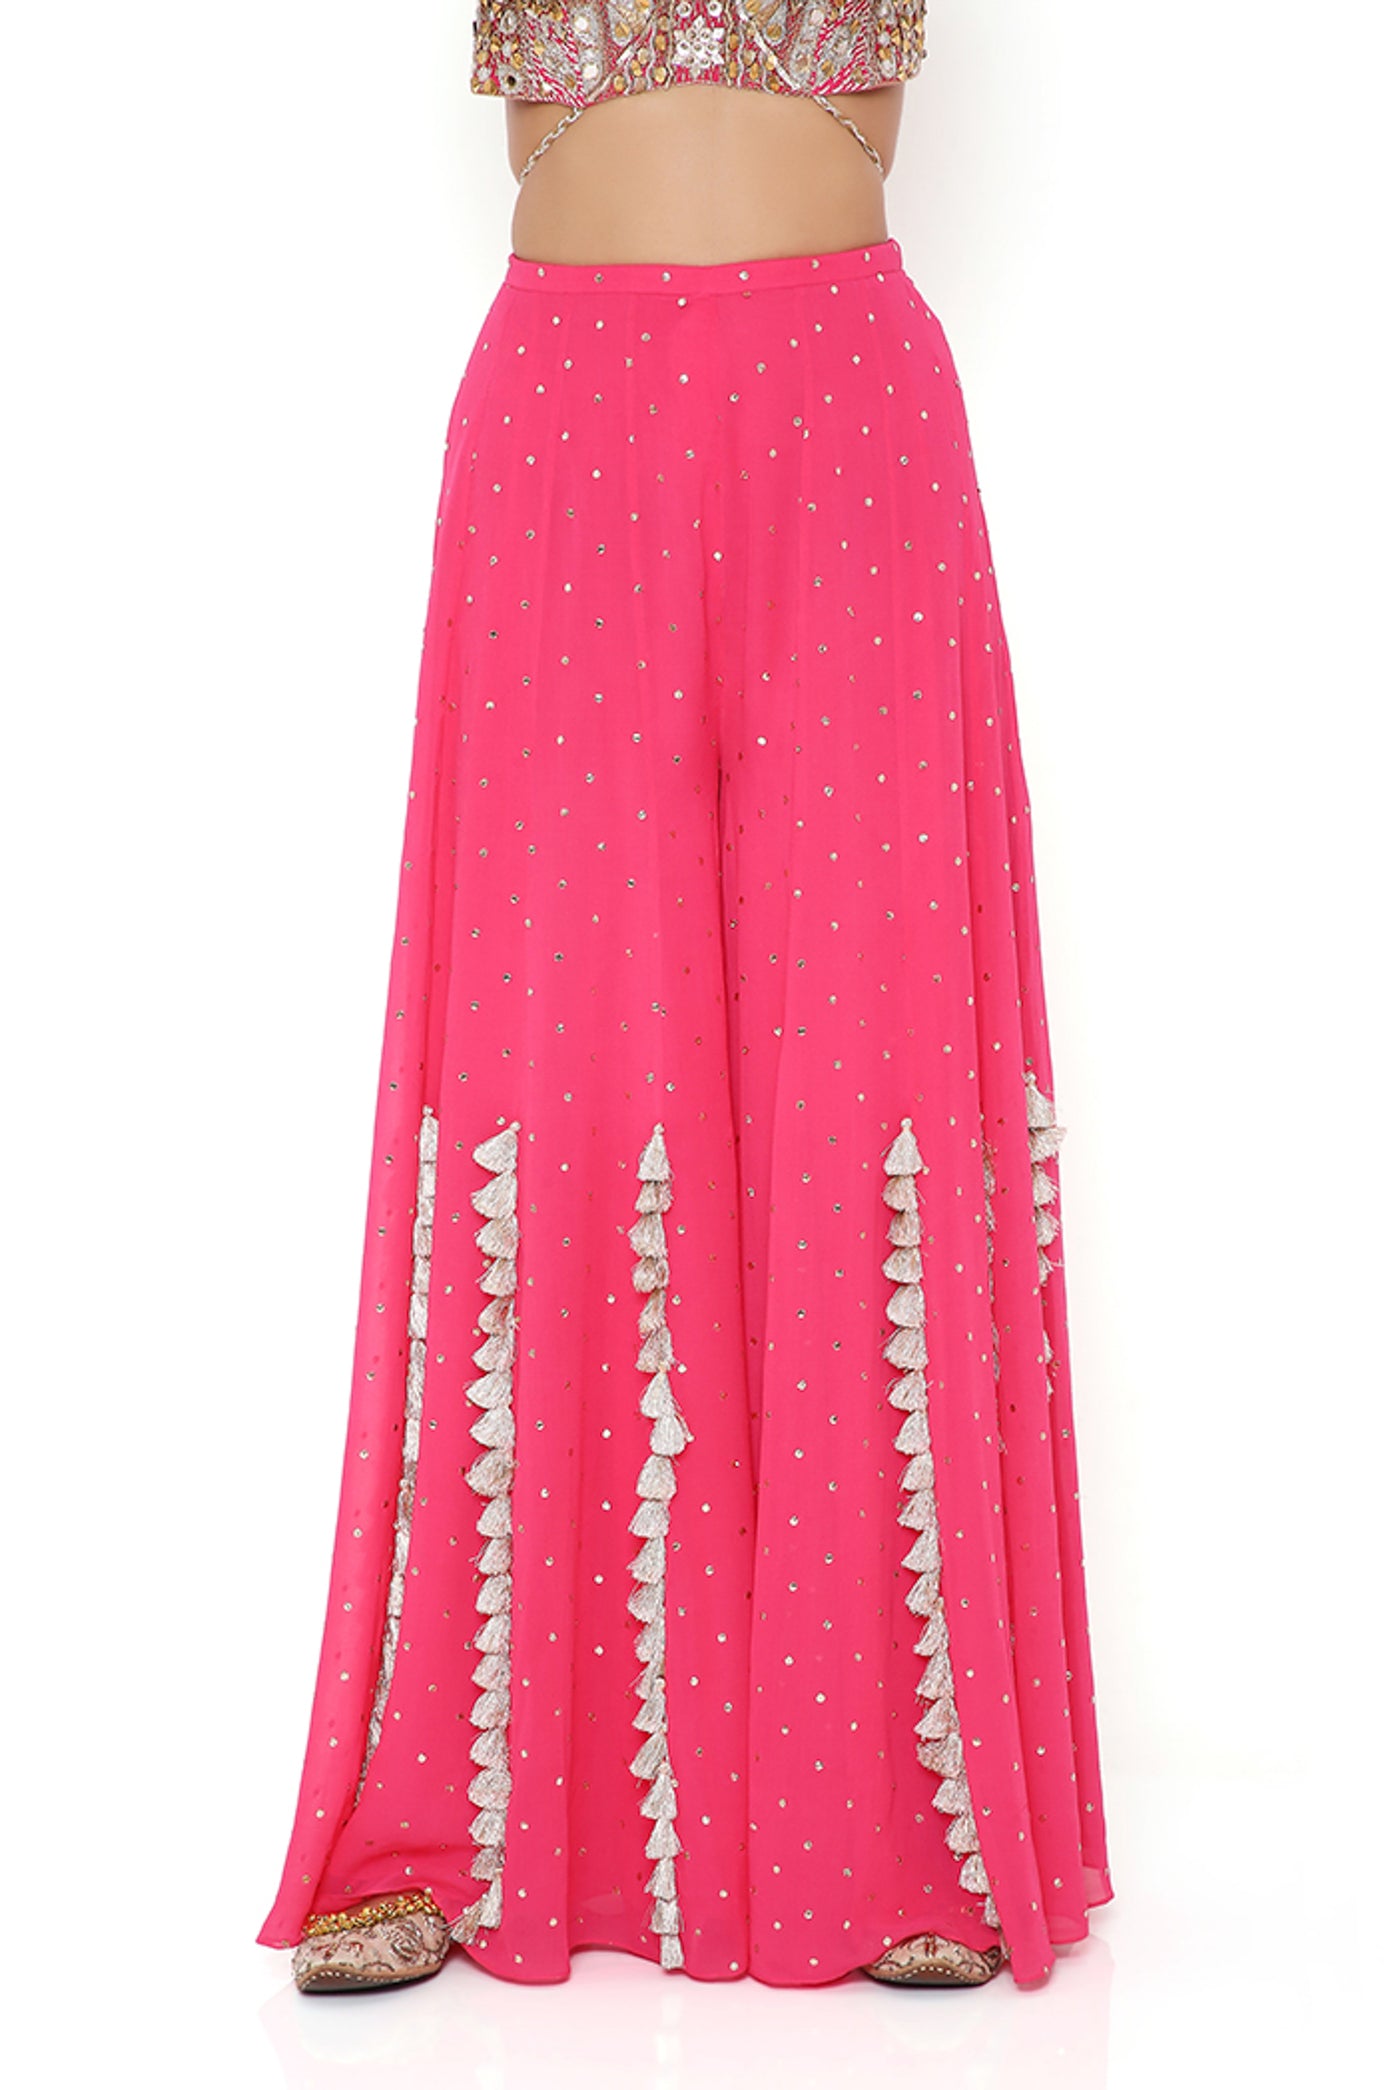 payal singhal Hot Pink Georgette Embroidered Choli With Mukaish Georgette Sharara And Mukaish Net Dupatta festive indian designer wear online shopping melange singapore